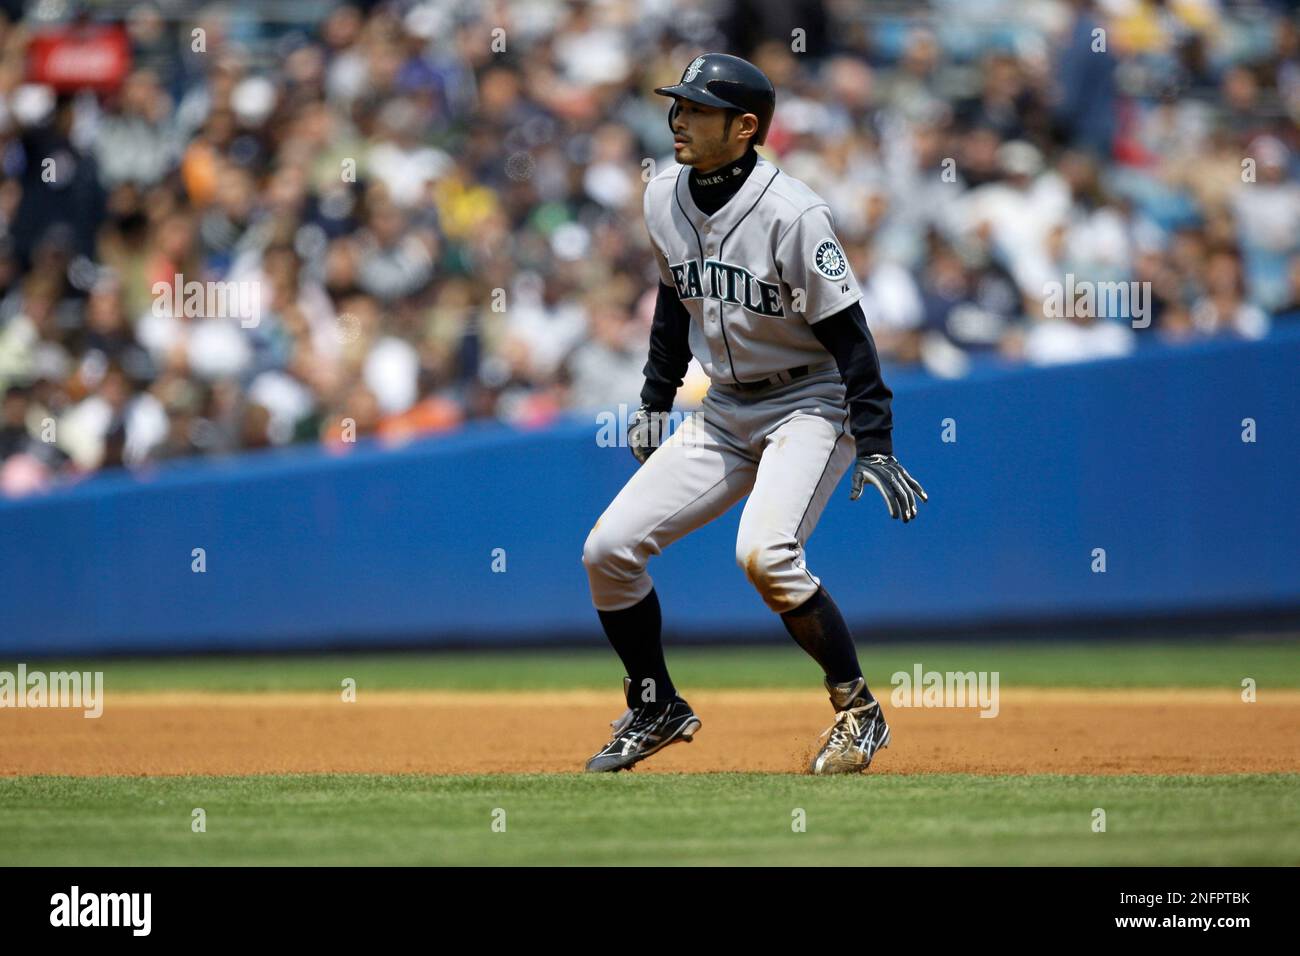 Seattle Mariners' Ichiro Suzuki takes a lead off second base against the  New York Yankees in Major League Baseball action Saturday, May 3, 2008 at  Yankee Stadium in New York. (AP Photo/Julie